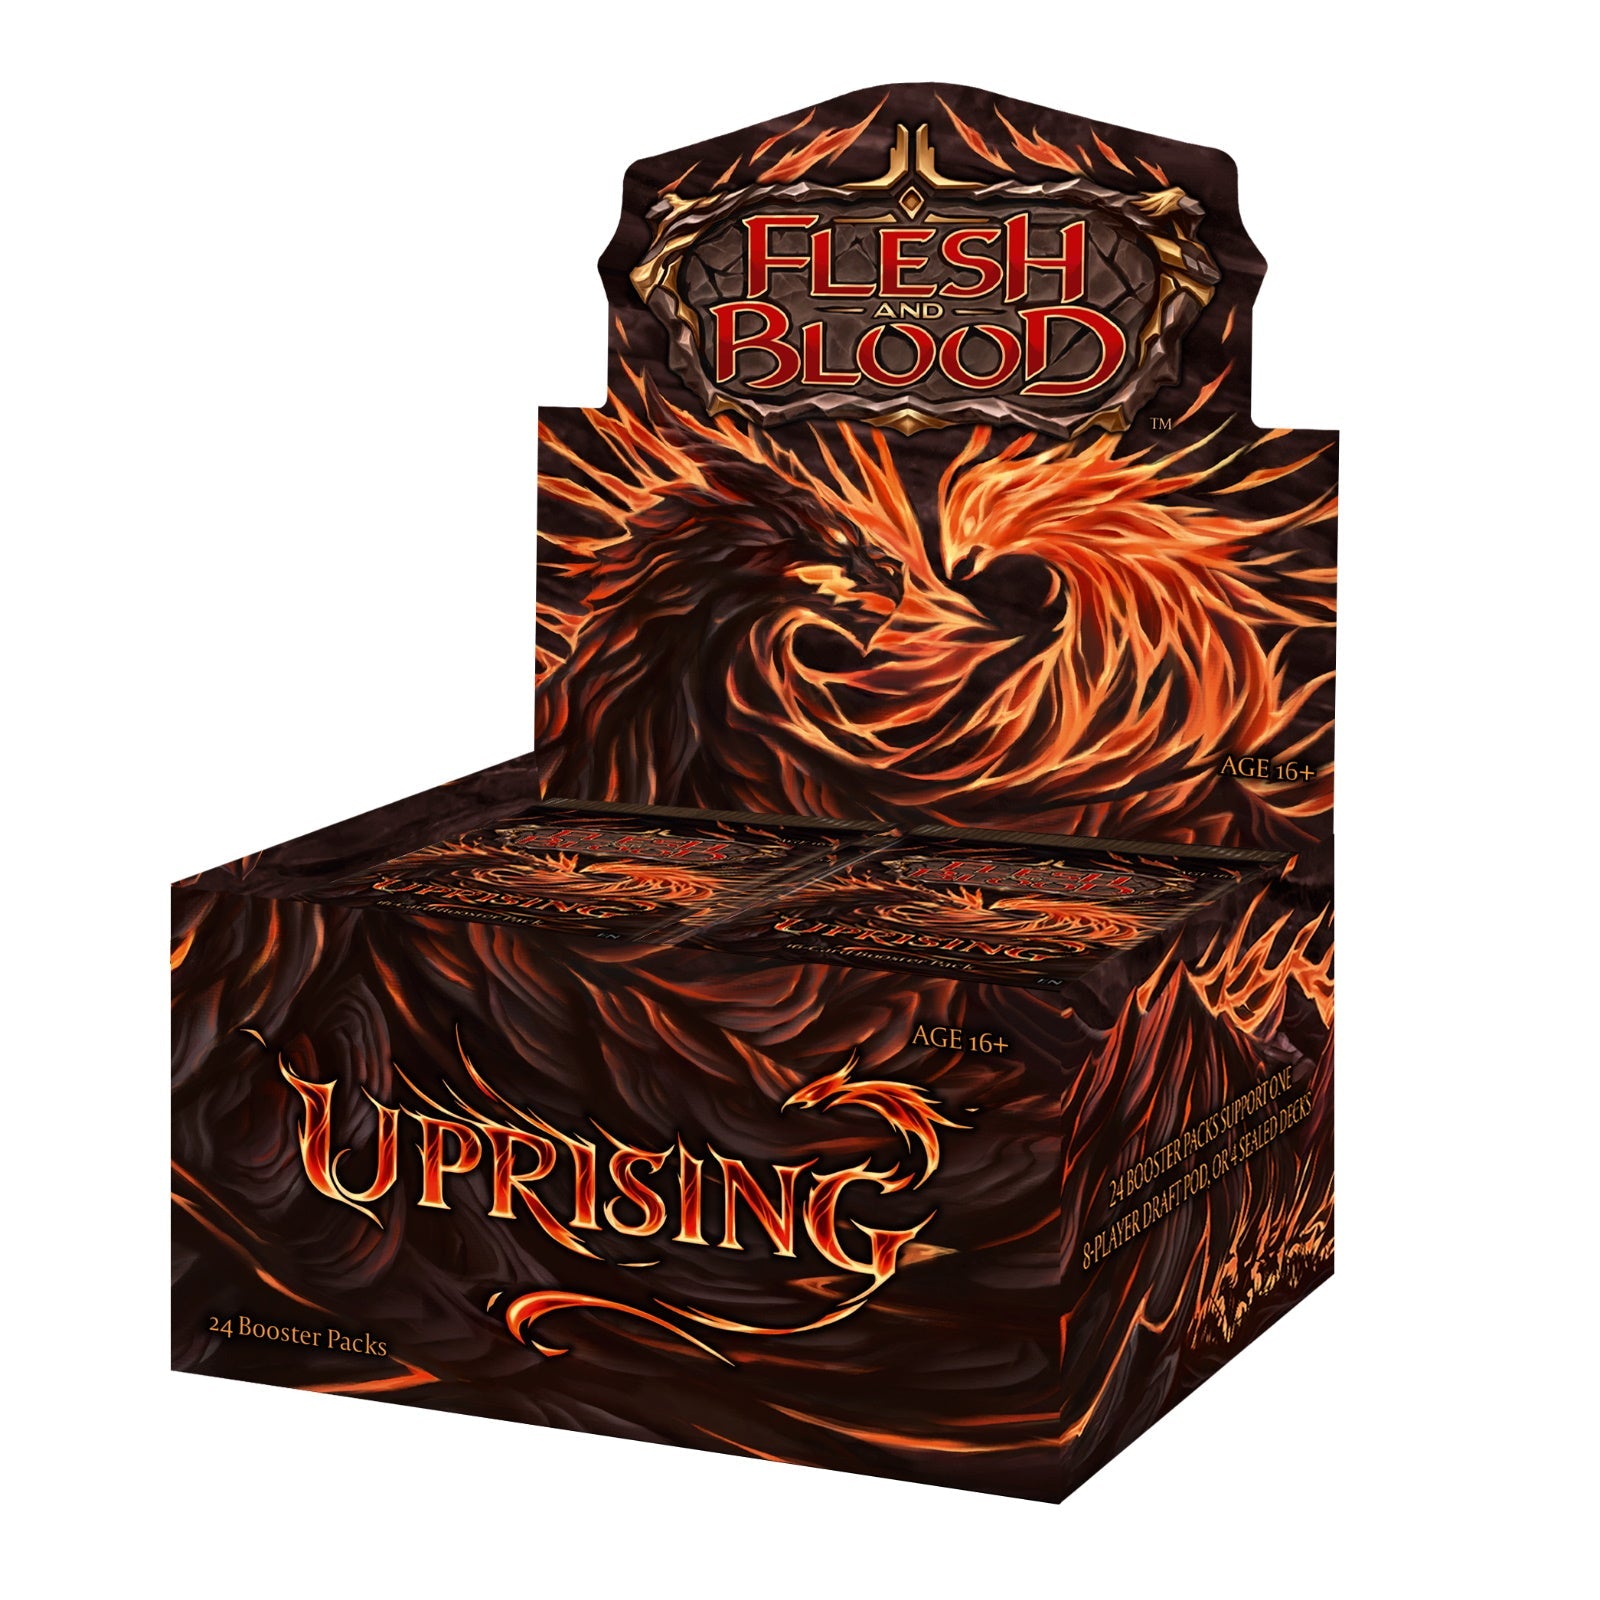 Flesh and Blood Uprising - BOX of 24 Booster Packs